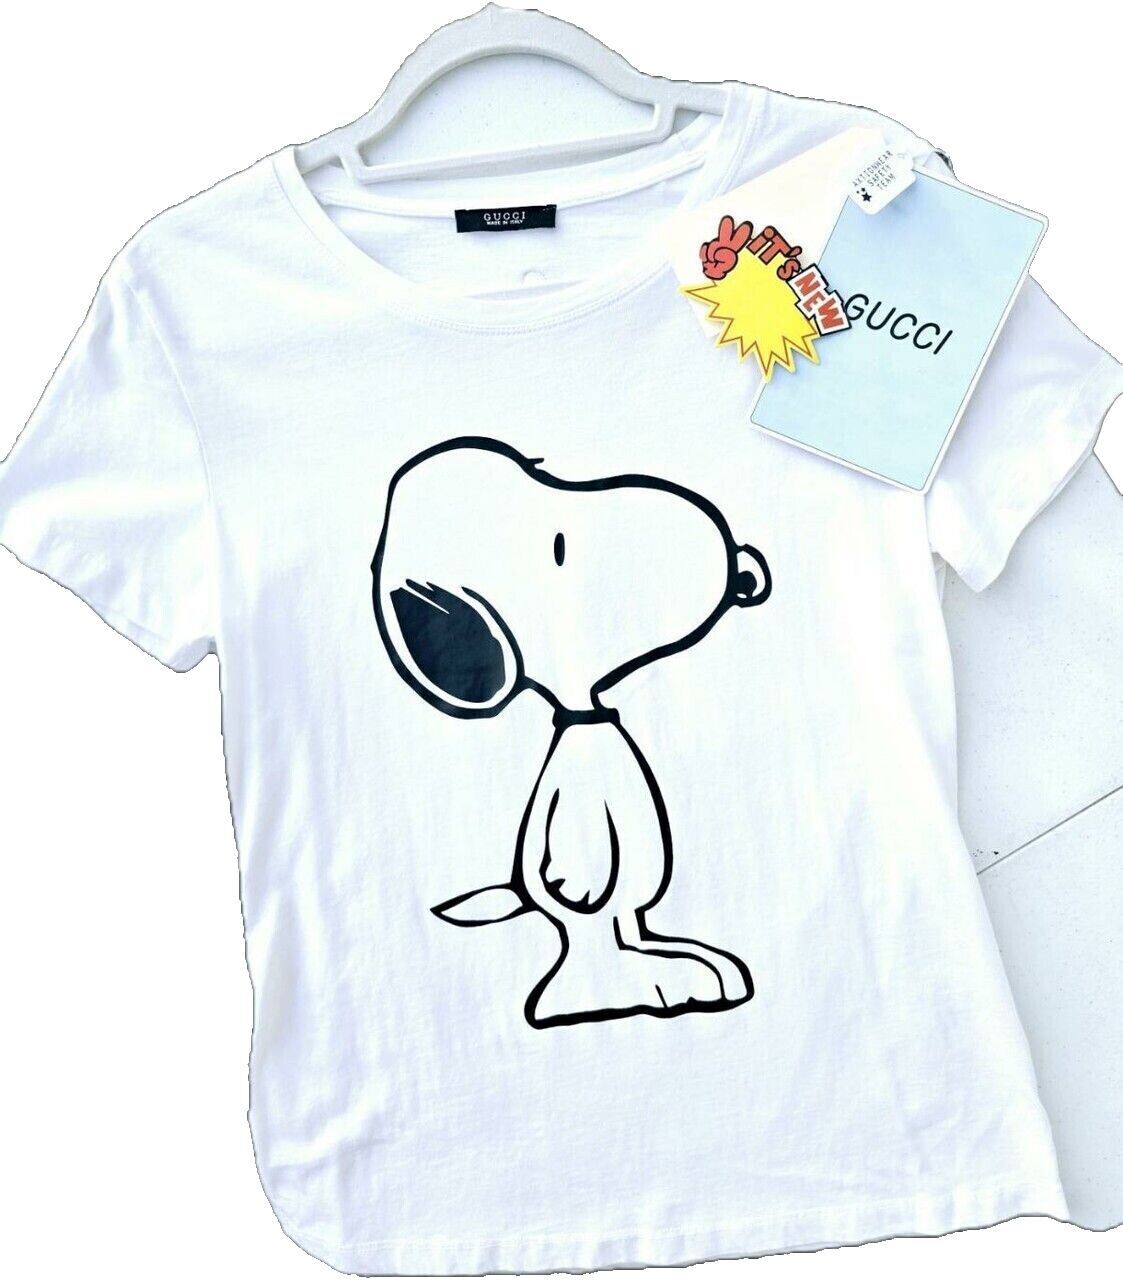 Gucci Designer Brand Charlie Brown T-Shirt With Snoopy Print